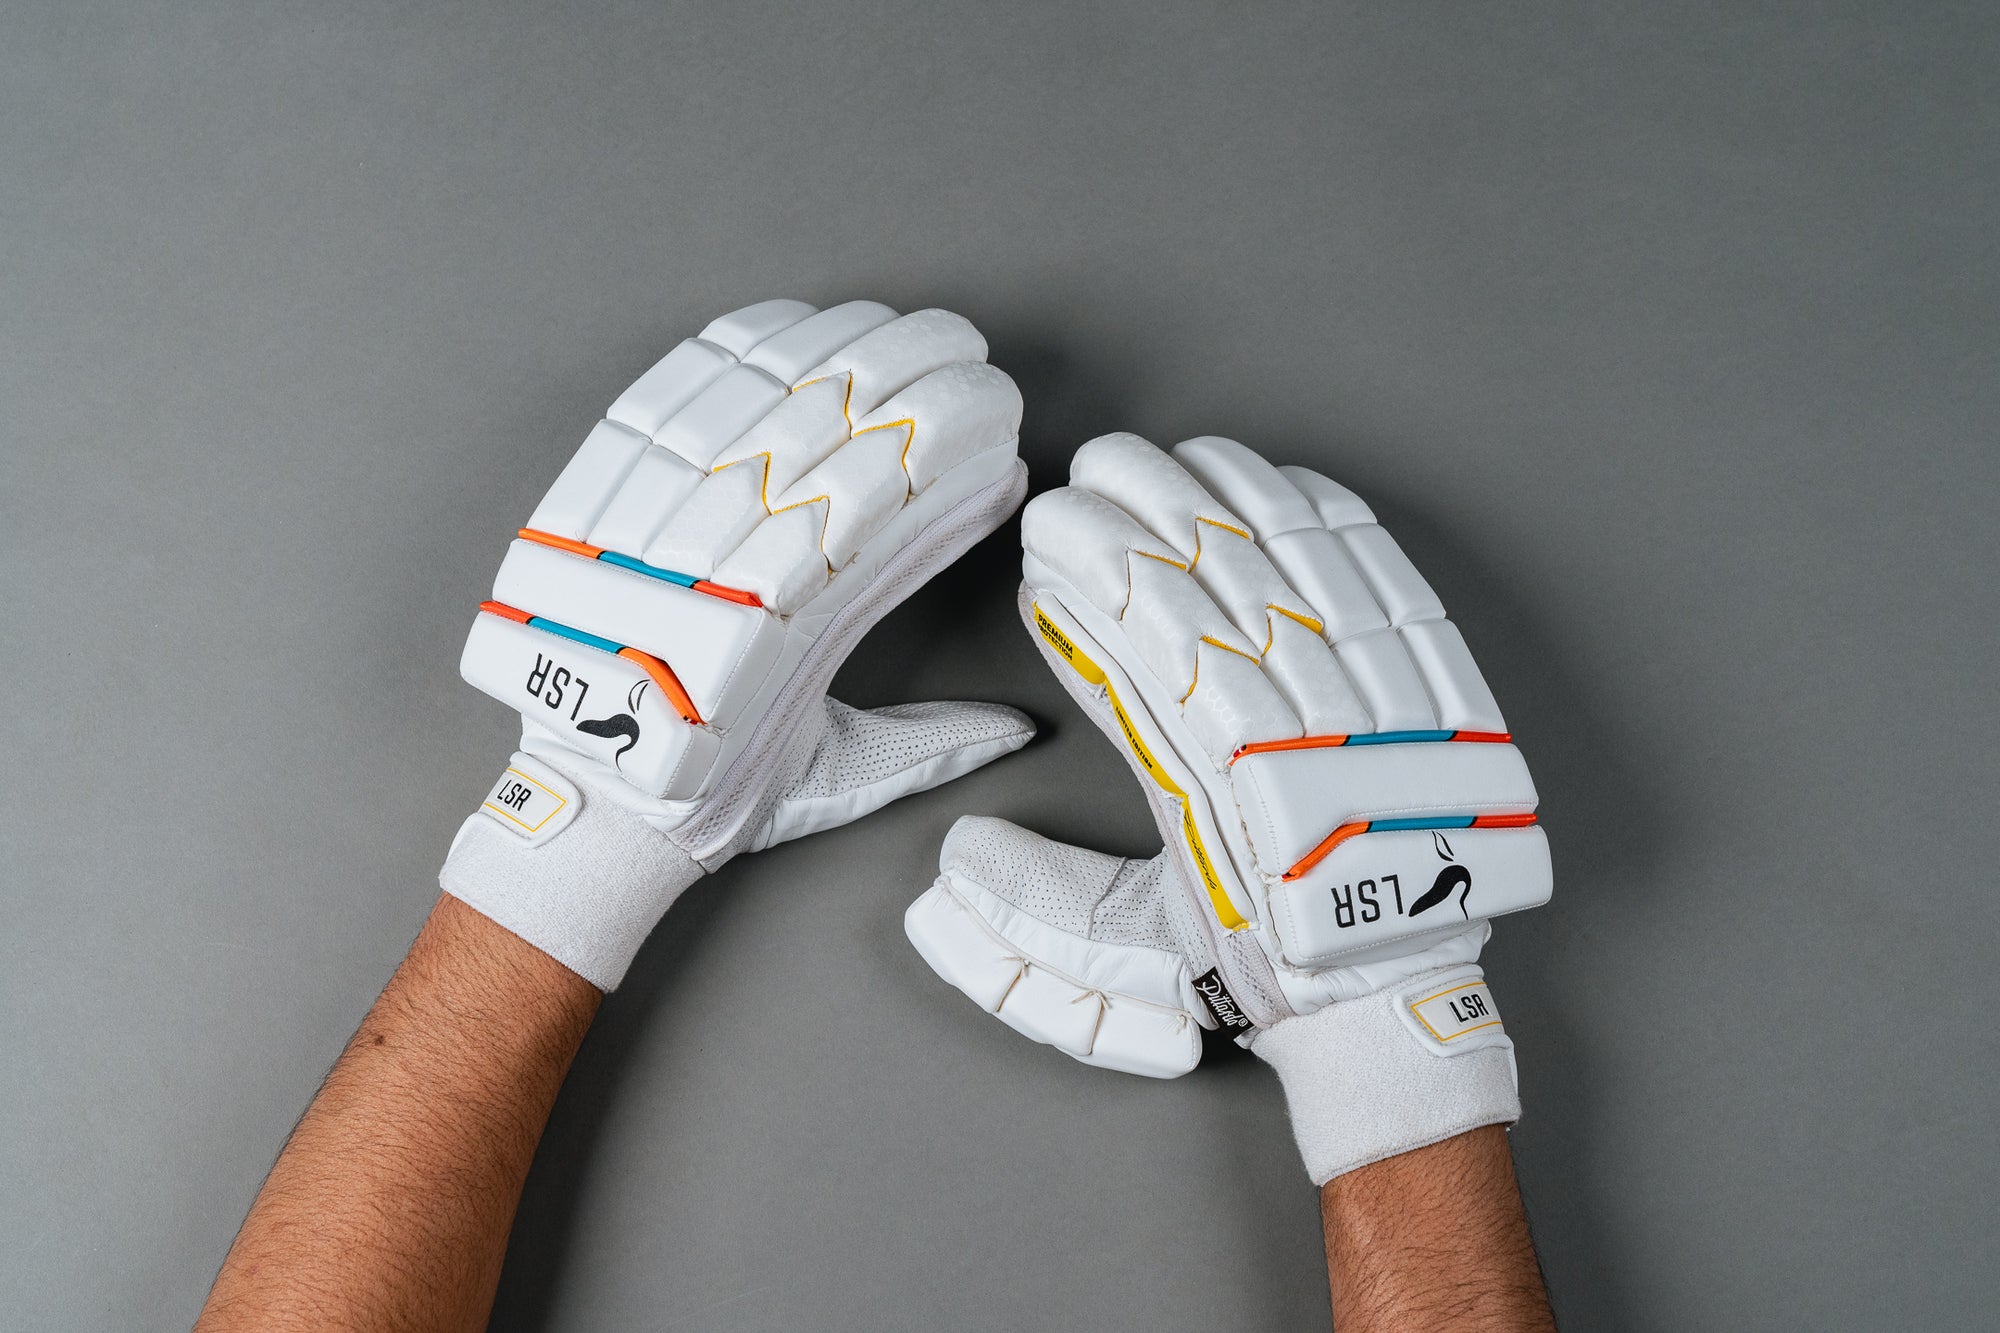 LSR SPORTS - Limited Edition Gloves